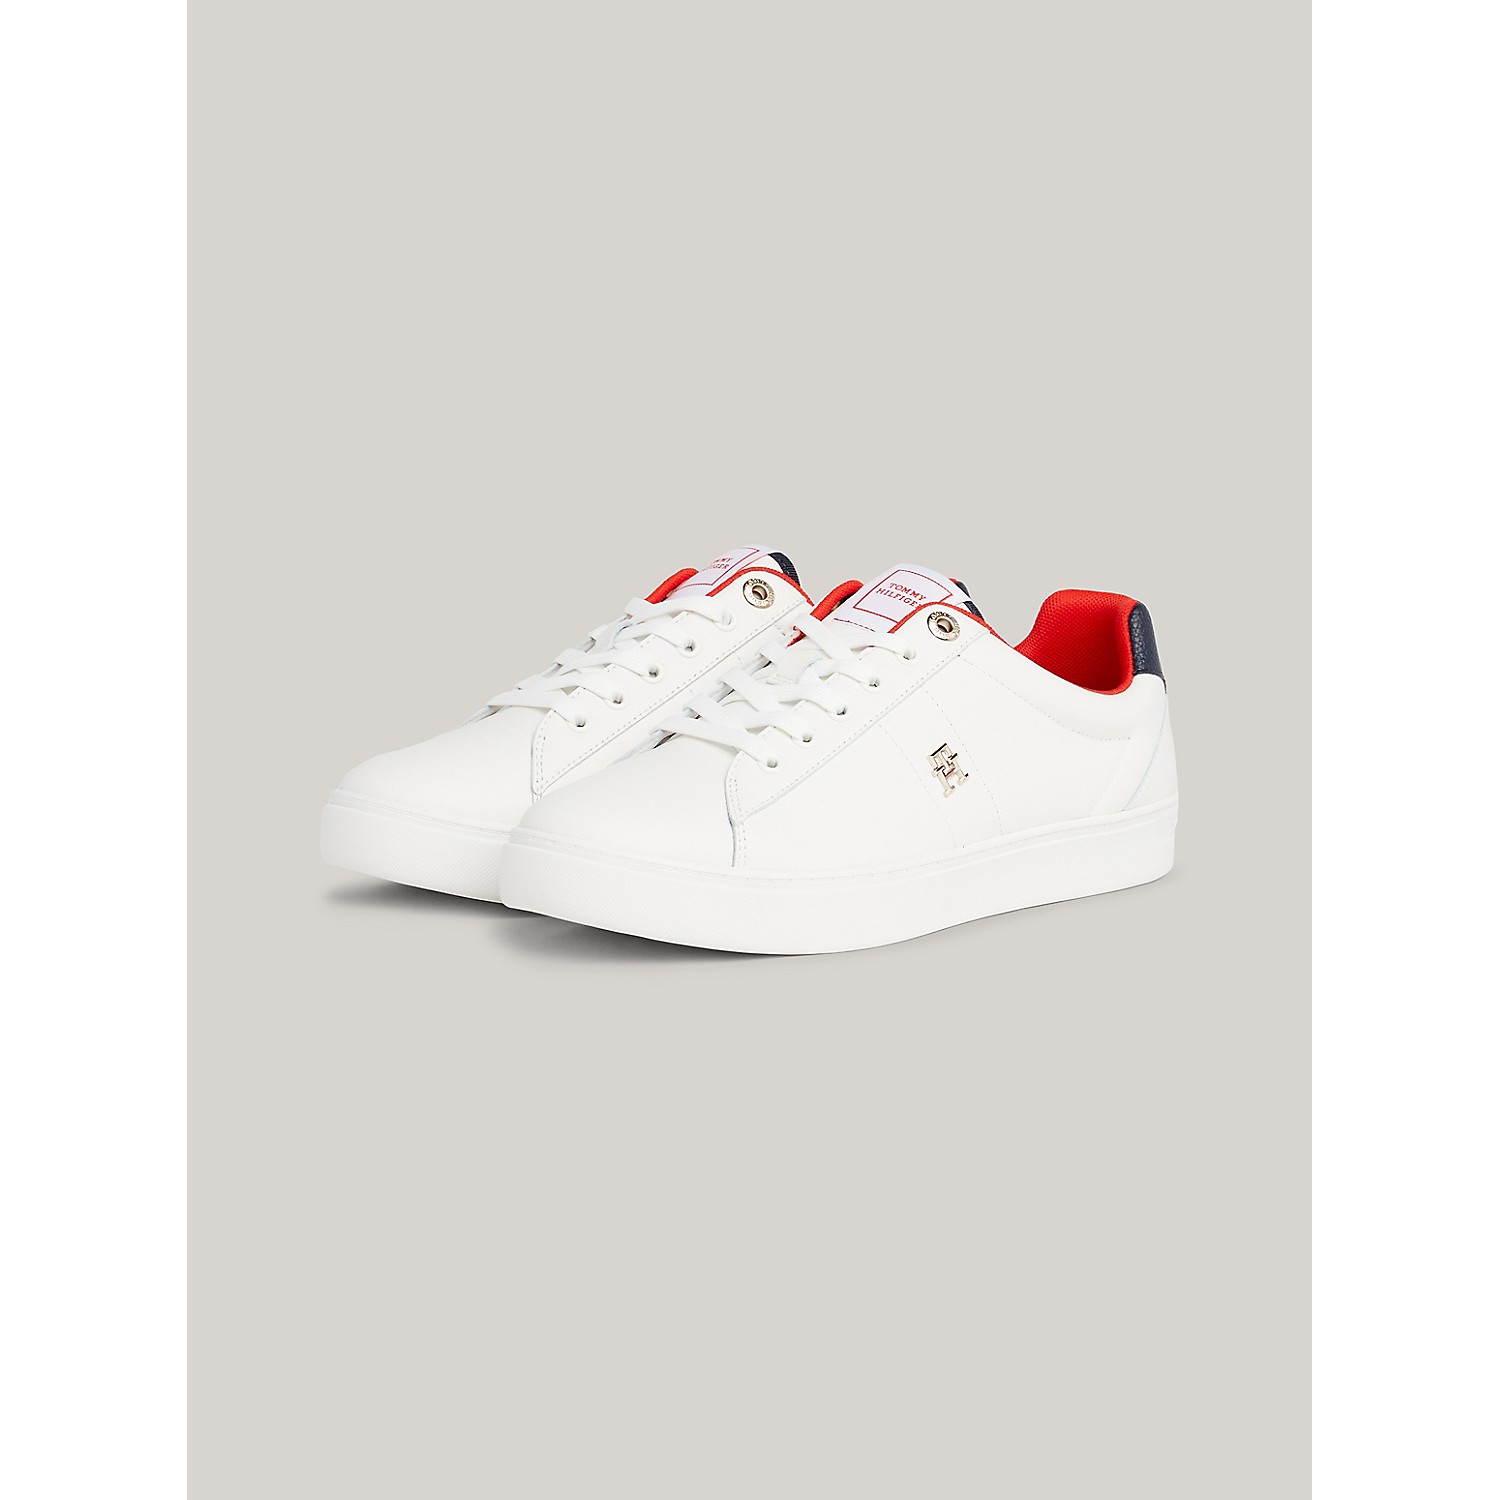 TOMMY HILFIGER Monogram Leather Cupsole Sneaker